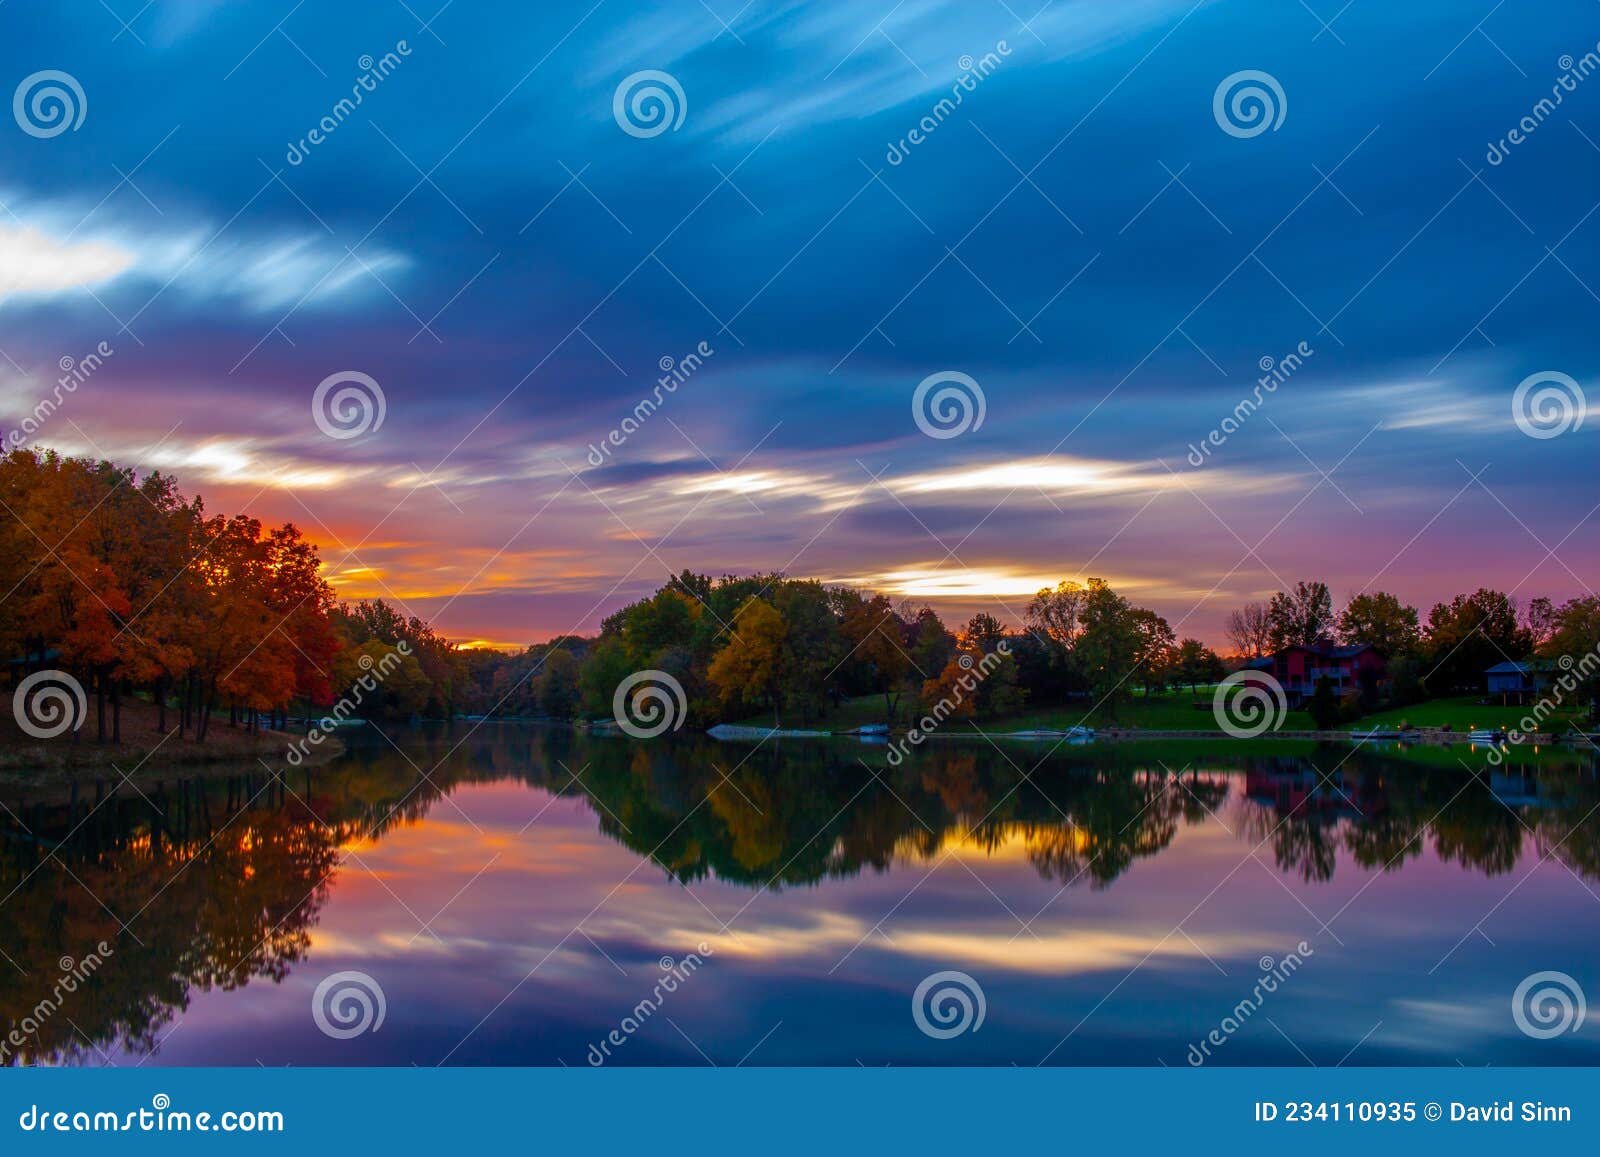 autumn lake in woodford county, illinois after sunrise